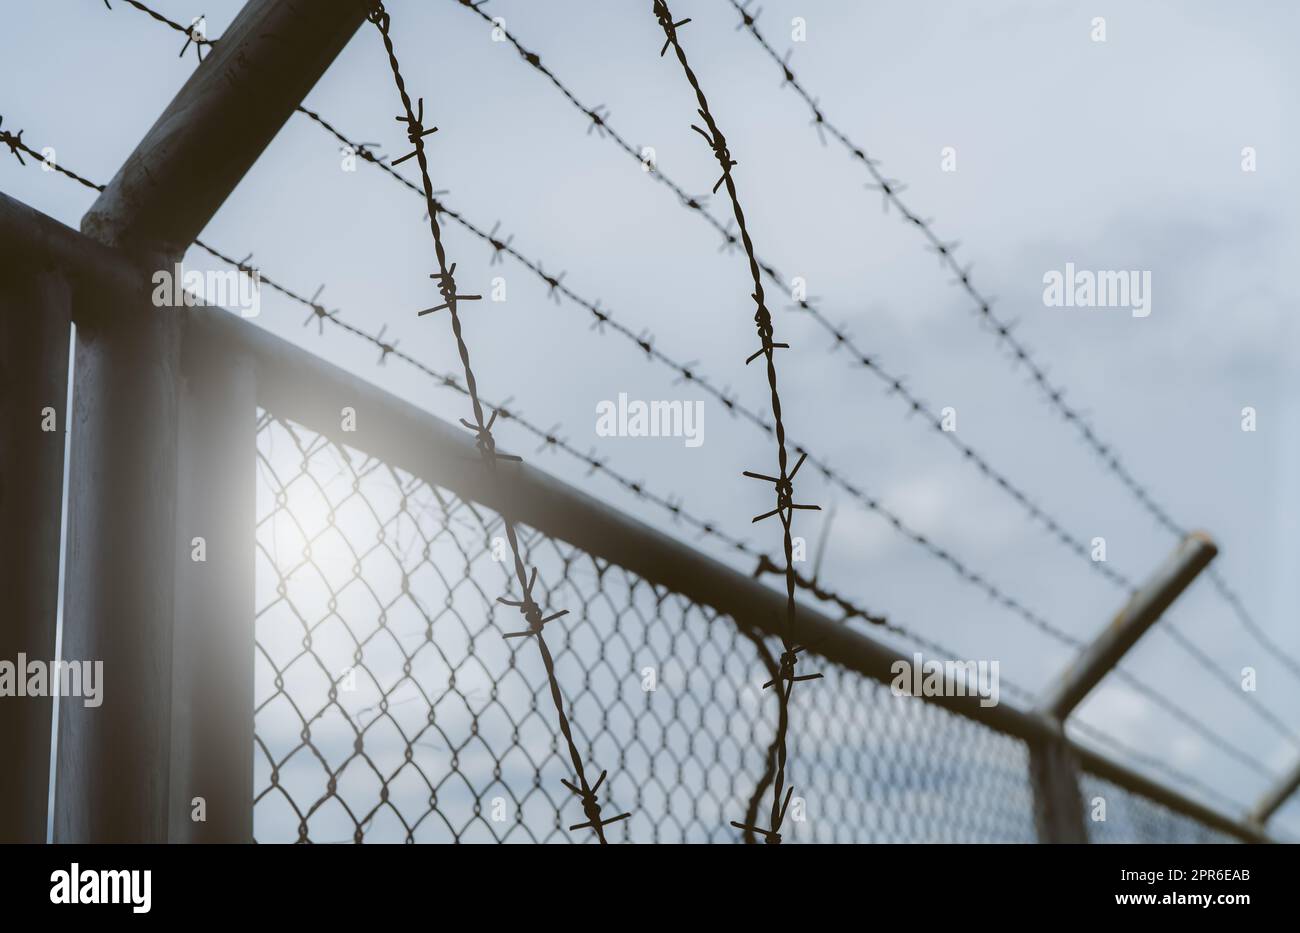 Prison security fence. Border fence. Barbed wire security fence. Razor wire jail fence. Boundary security wall. Prison for arrest of criminals or terrorists. Private area. Military zone concept. Stock Photo